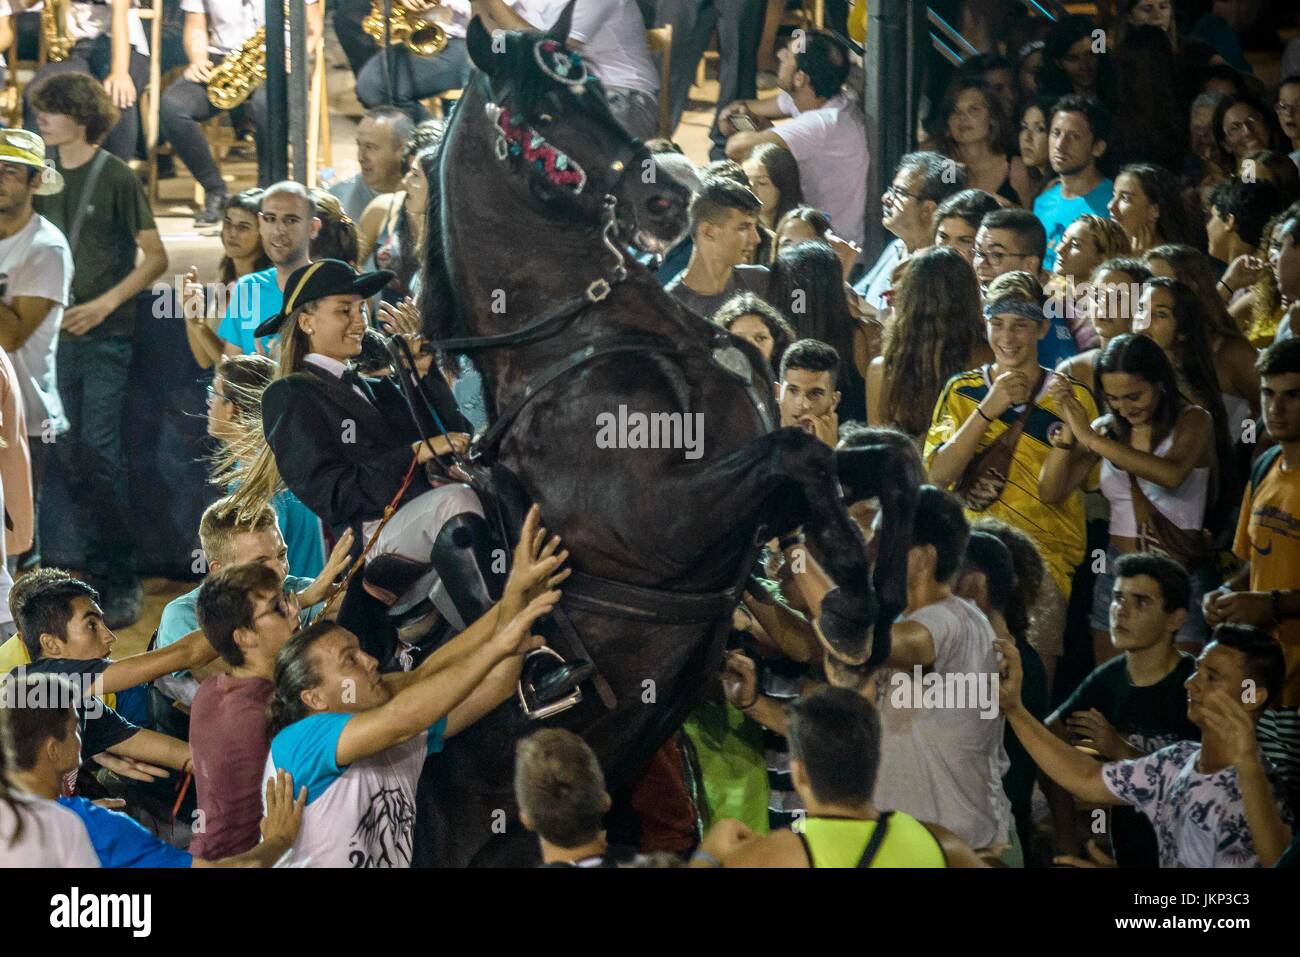 Es Castell, Spain. 24 July, 2017:  A 'caixer' (horse rider) rears up on his horse surrounded by a cheering crowd during the 'Jaleo' of the traditional 'Sant Jaume' (Saint James) festival in Es Castell, the town's patron saint fiesta Credit: Matthias Oesterle/Alamy Live News Stock Photo